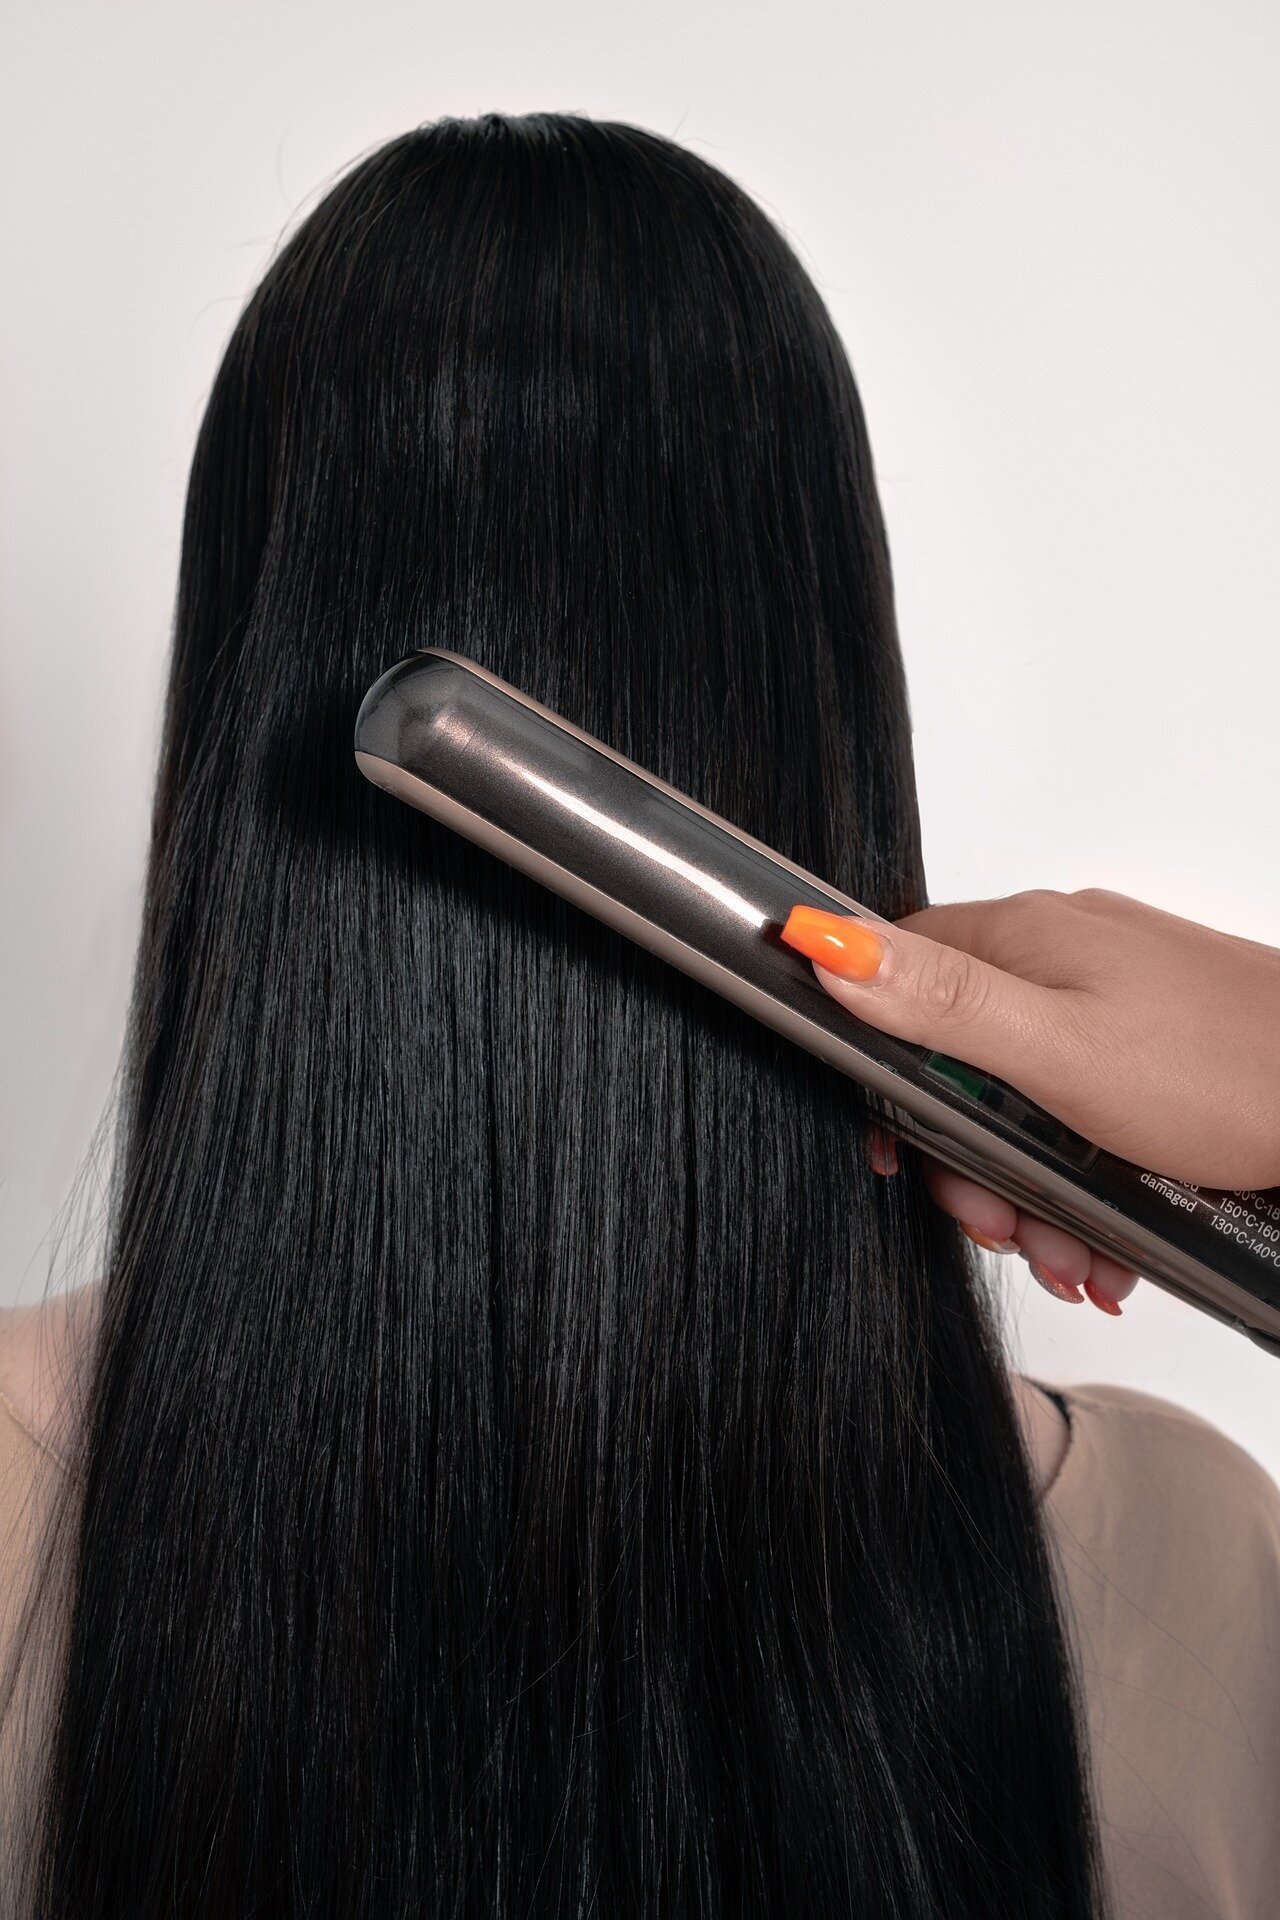 FDA’s plan to ban hair relaxer chemical called too little, too late